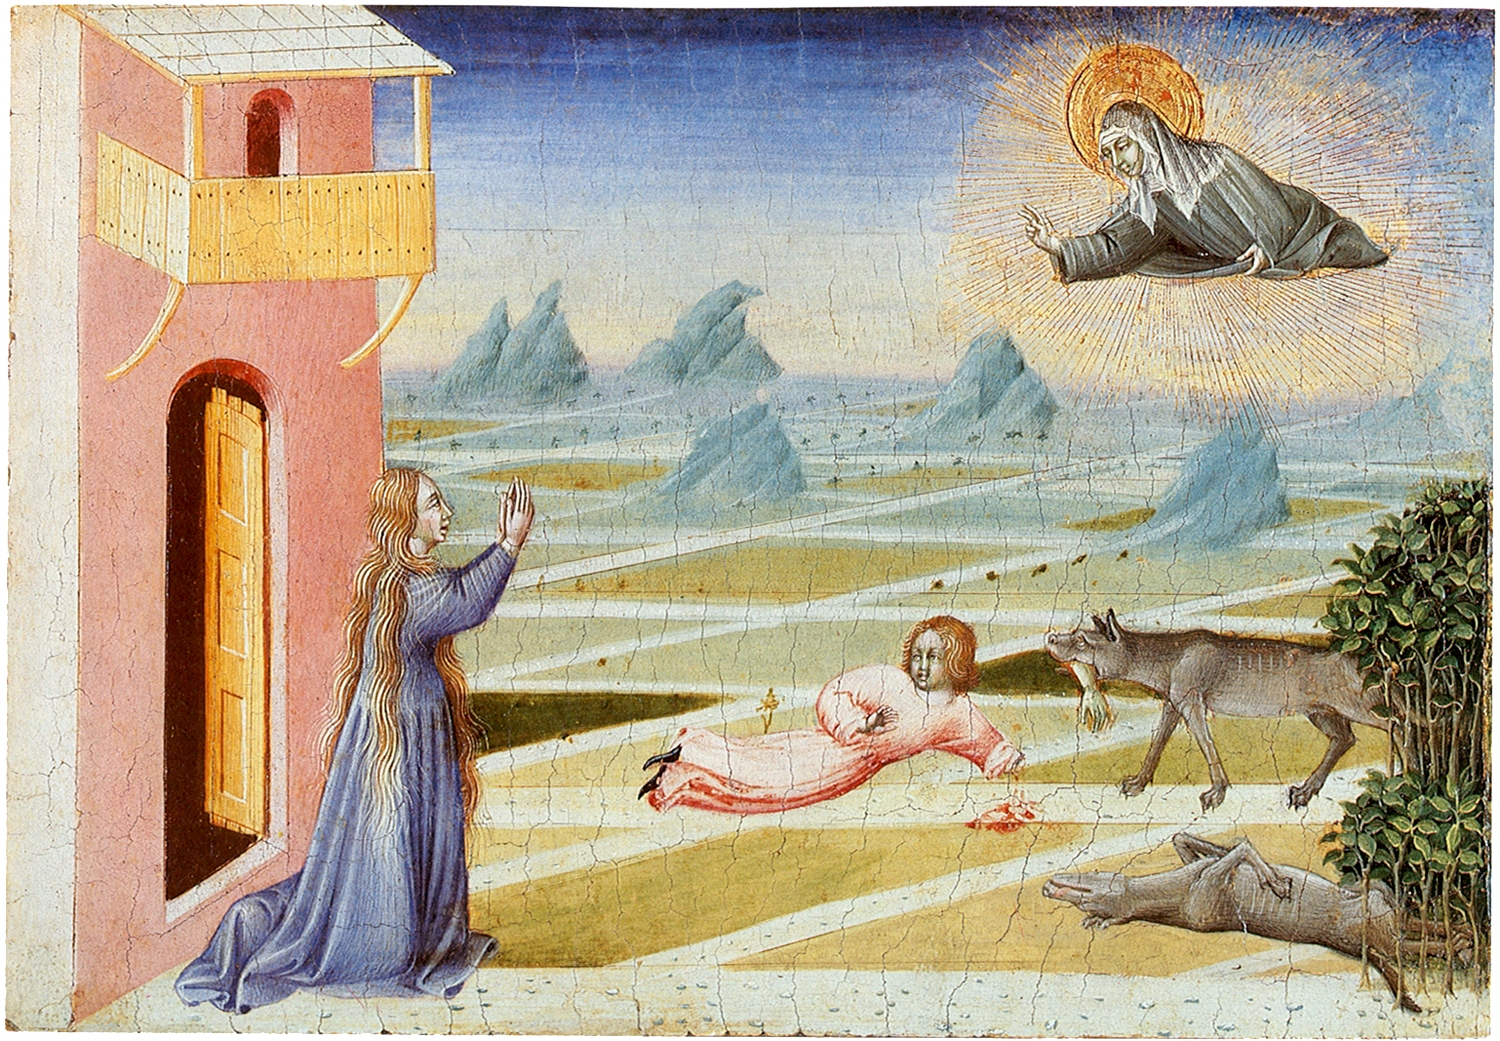 Painting by Giovanni de Paolo of St Clare intervening to save a child from a wolf (1455) By Giovanni di Paolo, Public Domain https://commons.wikimedia.org/w/index.php?curid=3915868